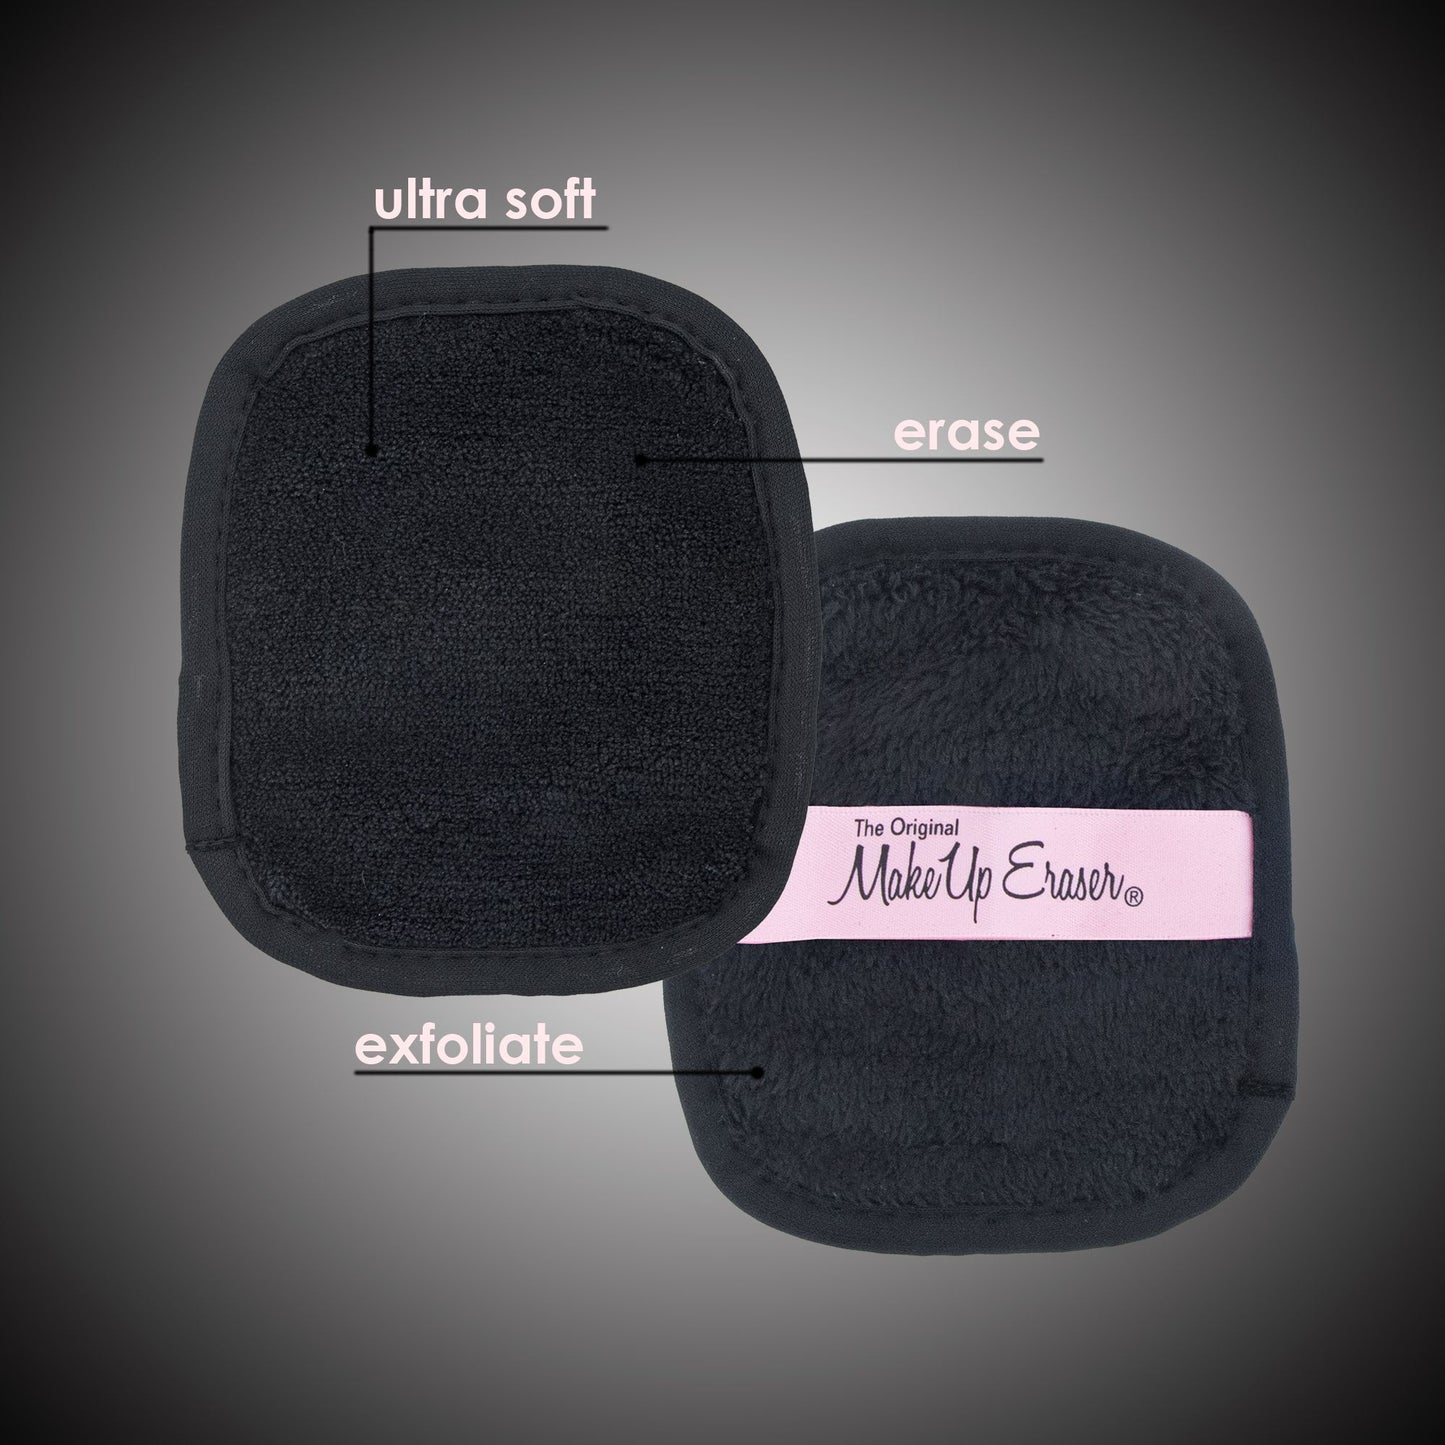 Front and back of Chic Black 7-Day Set MakeUp Eraser cloth. The front short fiber side is labeled as erase, and the back long fiber side is labeled as exfoliate.